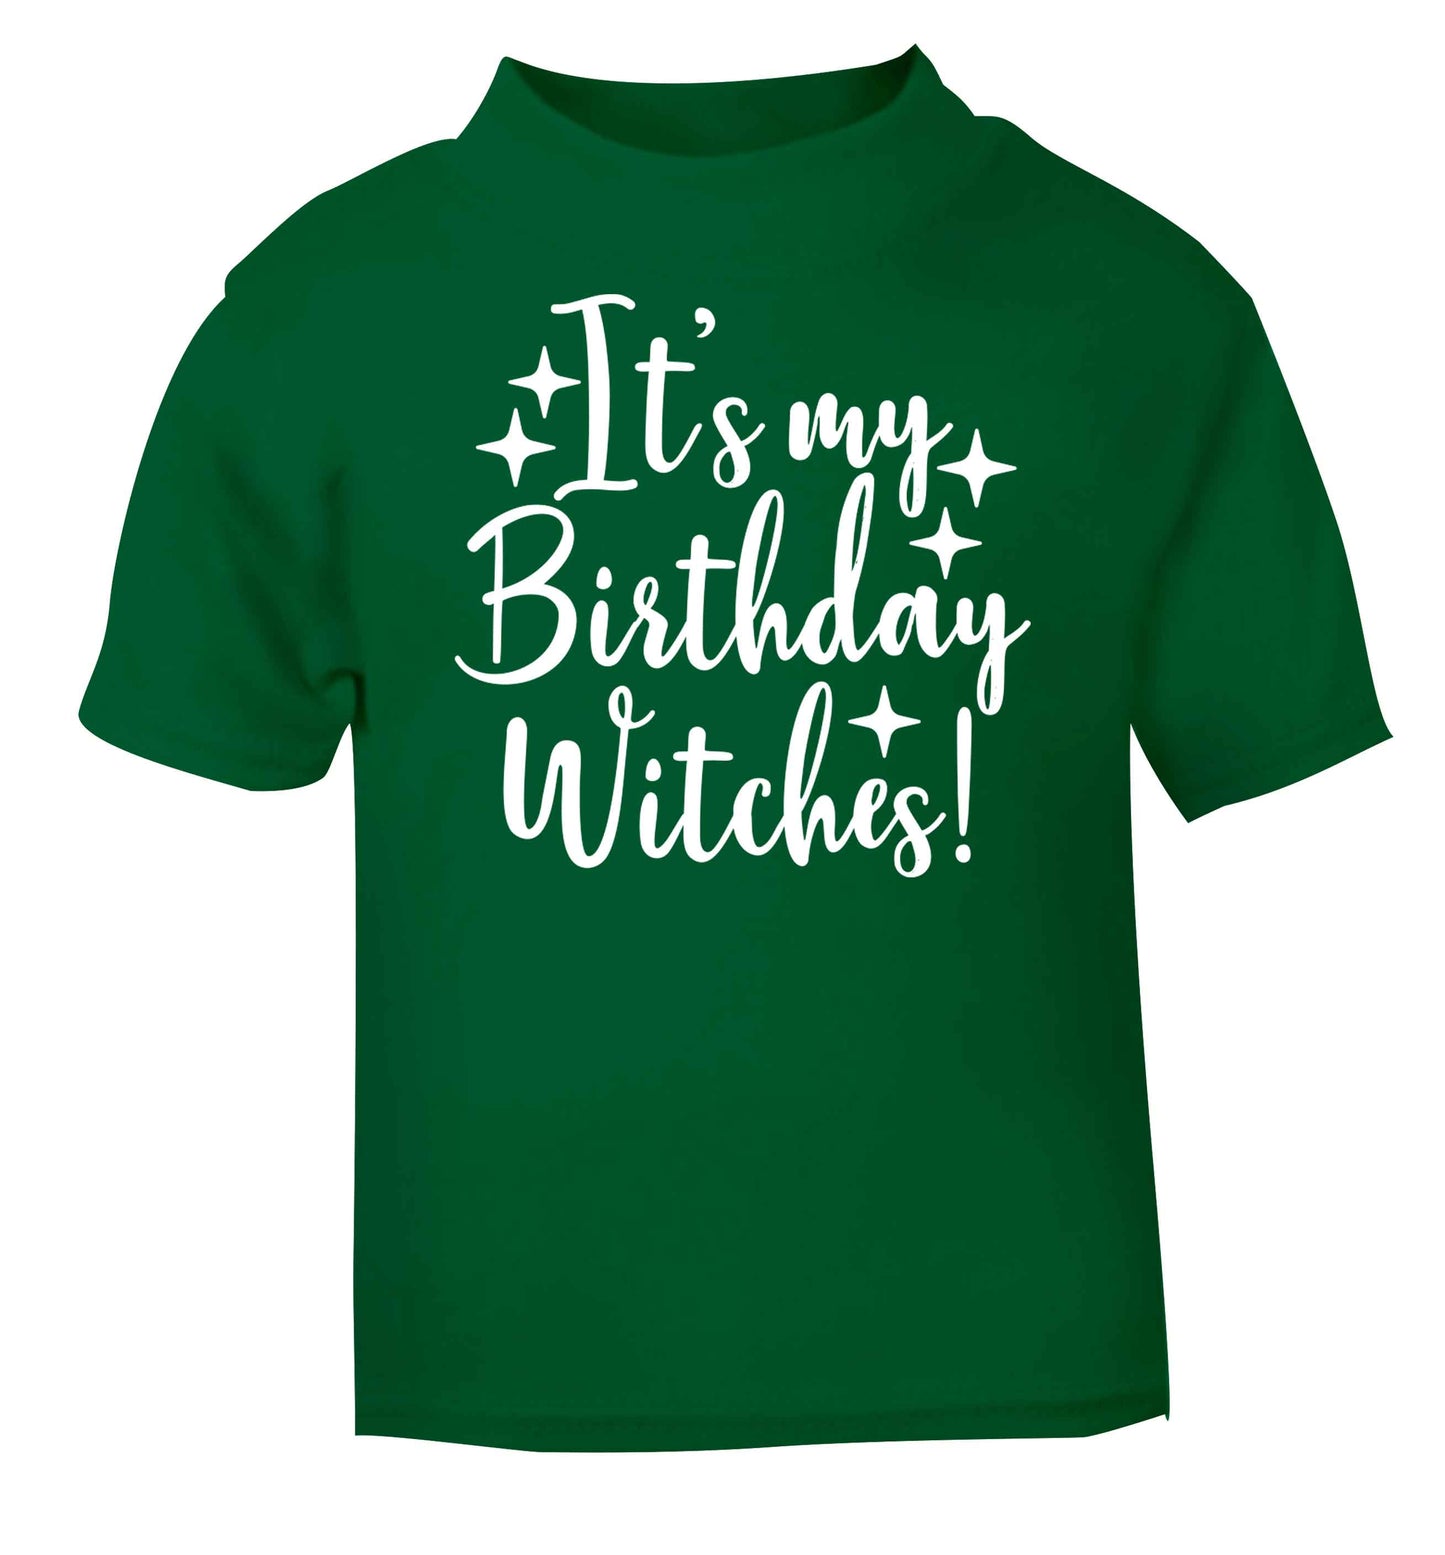 It's my birthday witches!green baby toddler Tshirt 2 Years